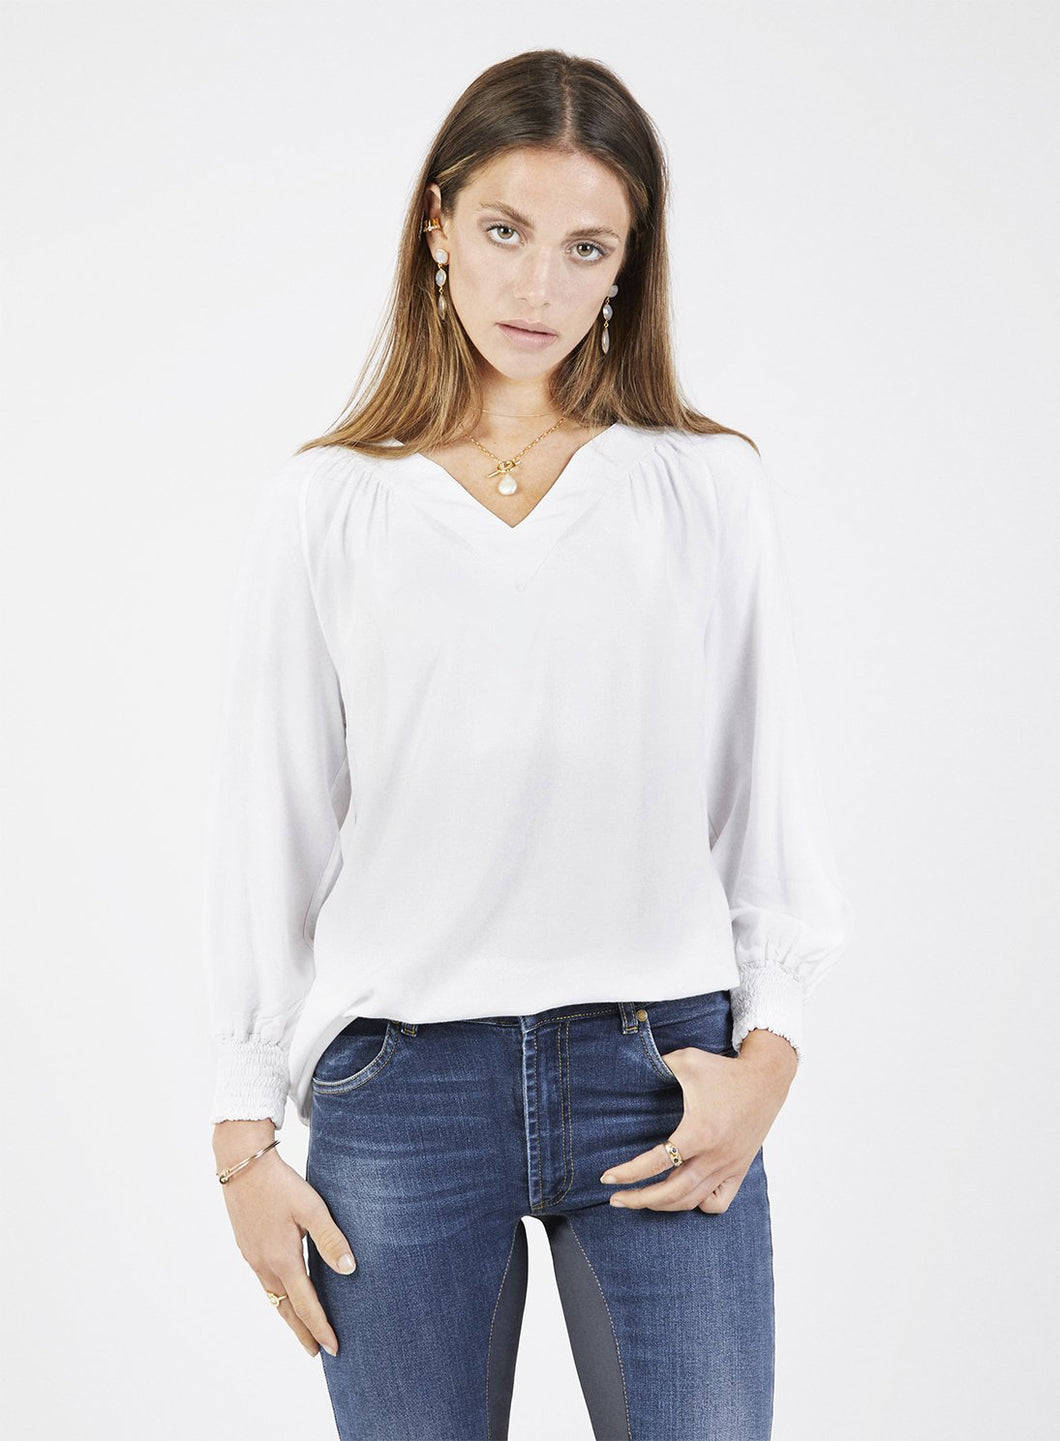 White Blouse With Smocked Cuffs by Graysey - Bare Fashion